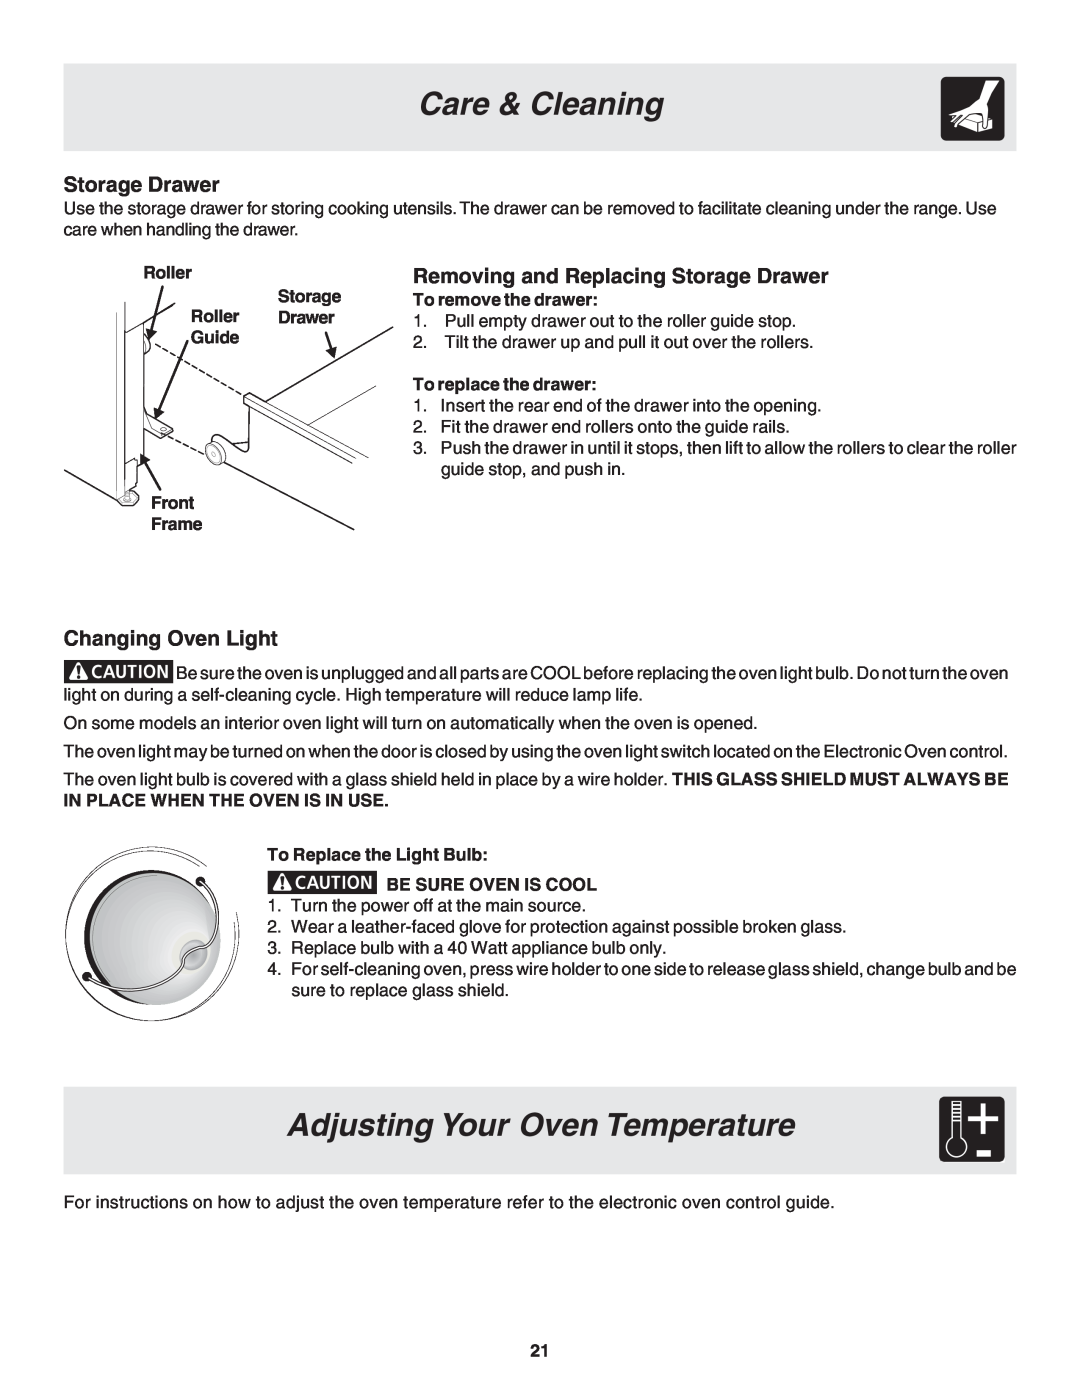 Frigidaire 318200880 manual Adjusting Your Oven Temperature, Care & Cleaning, Storage Drawer, Changing Oven Light 